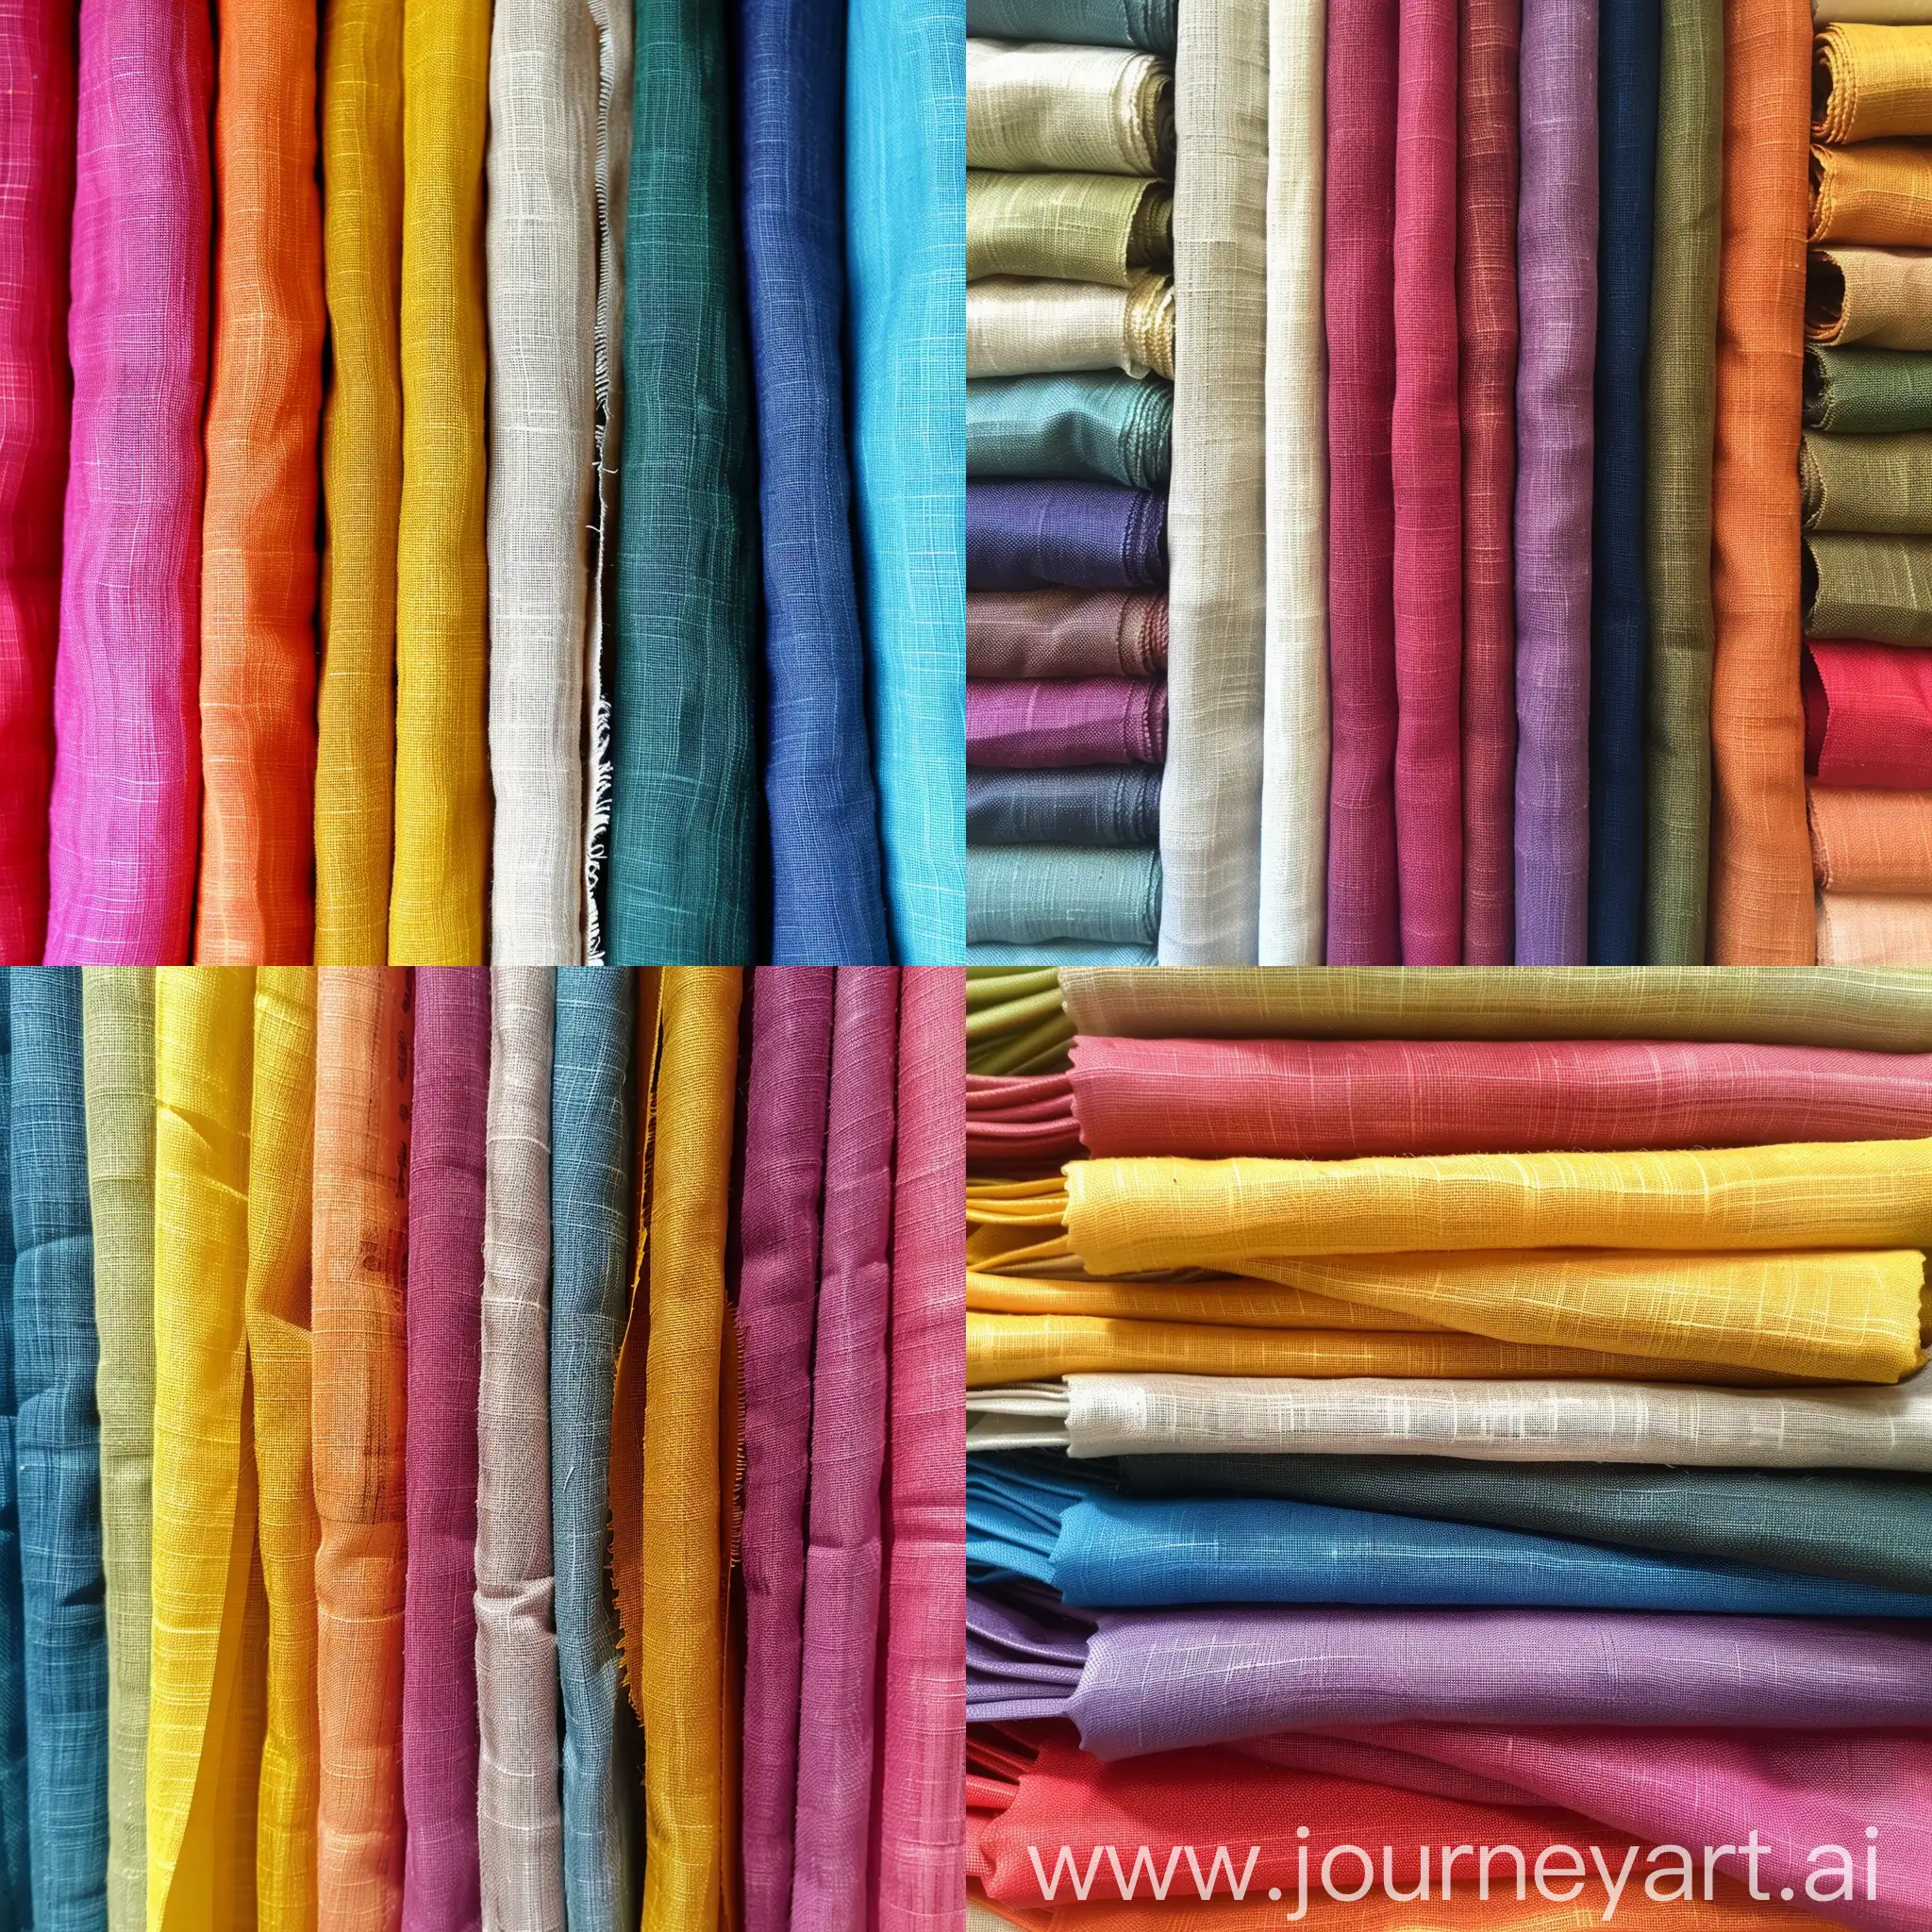 Vibrant-Plain-Fabric-Swatches-Arranged-in-Array